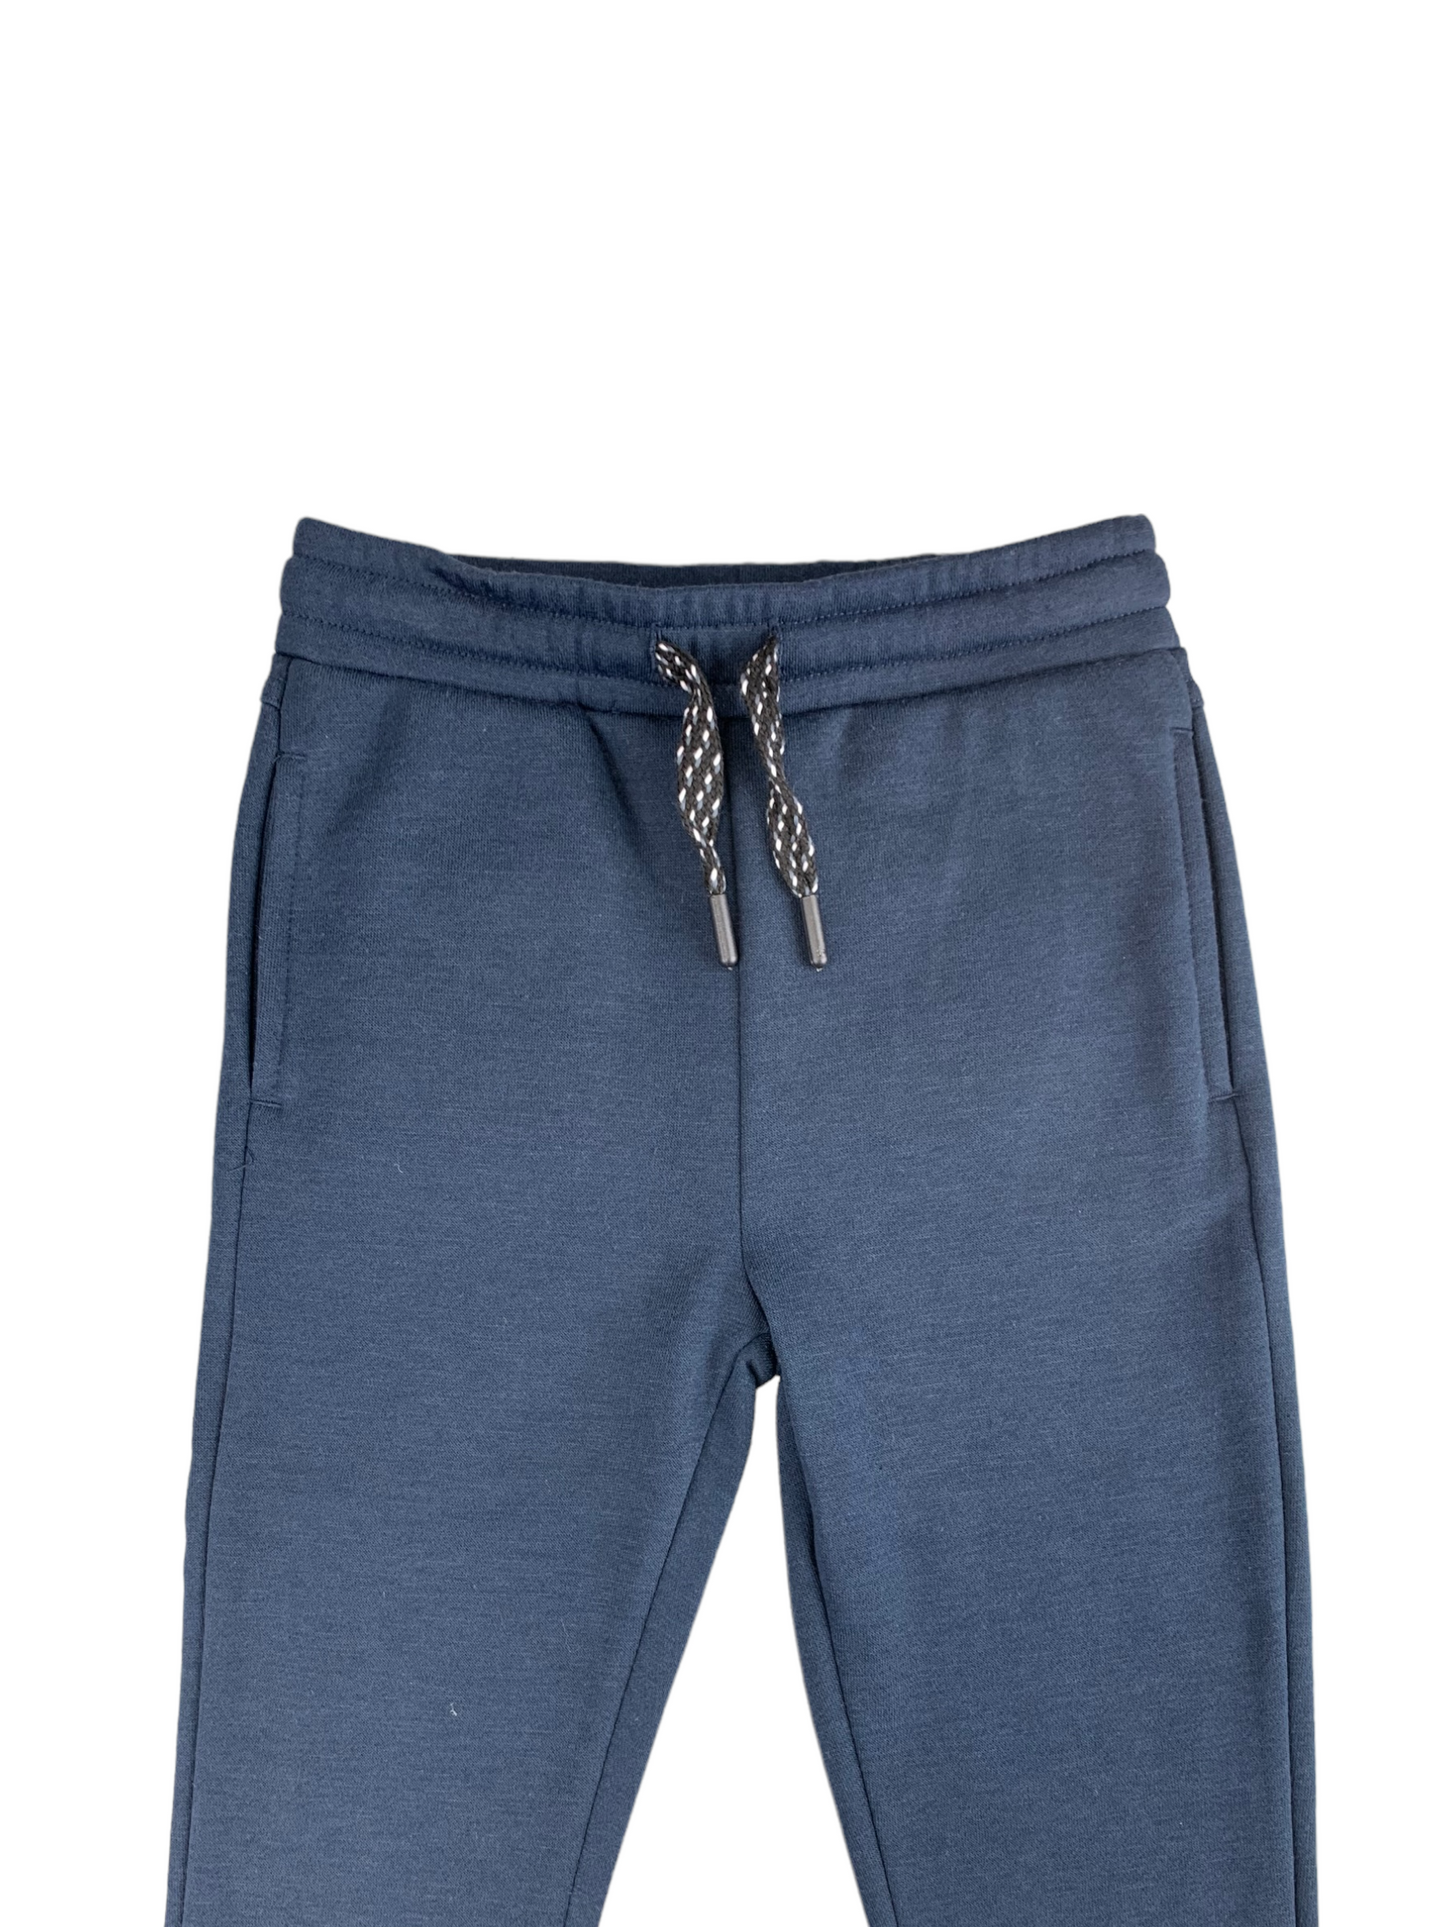 Navy joggers for boys 2 to 7 years